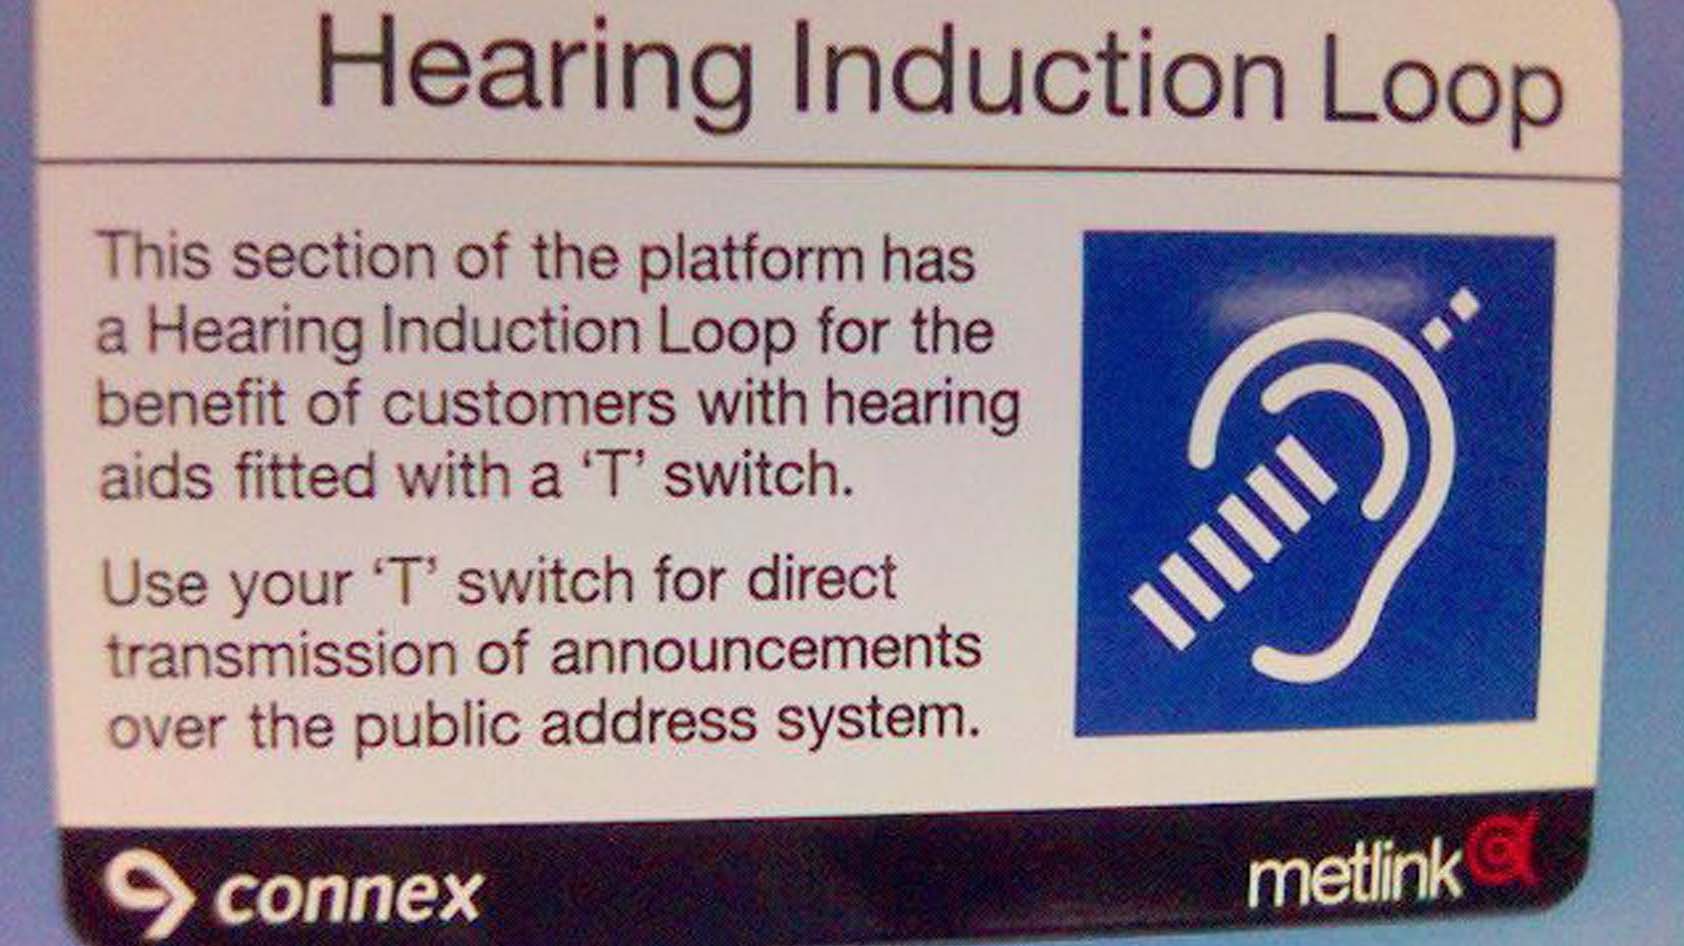 A sign points out that a hearing induction loop is available for use with a hearing aid.